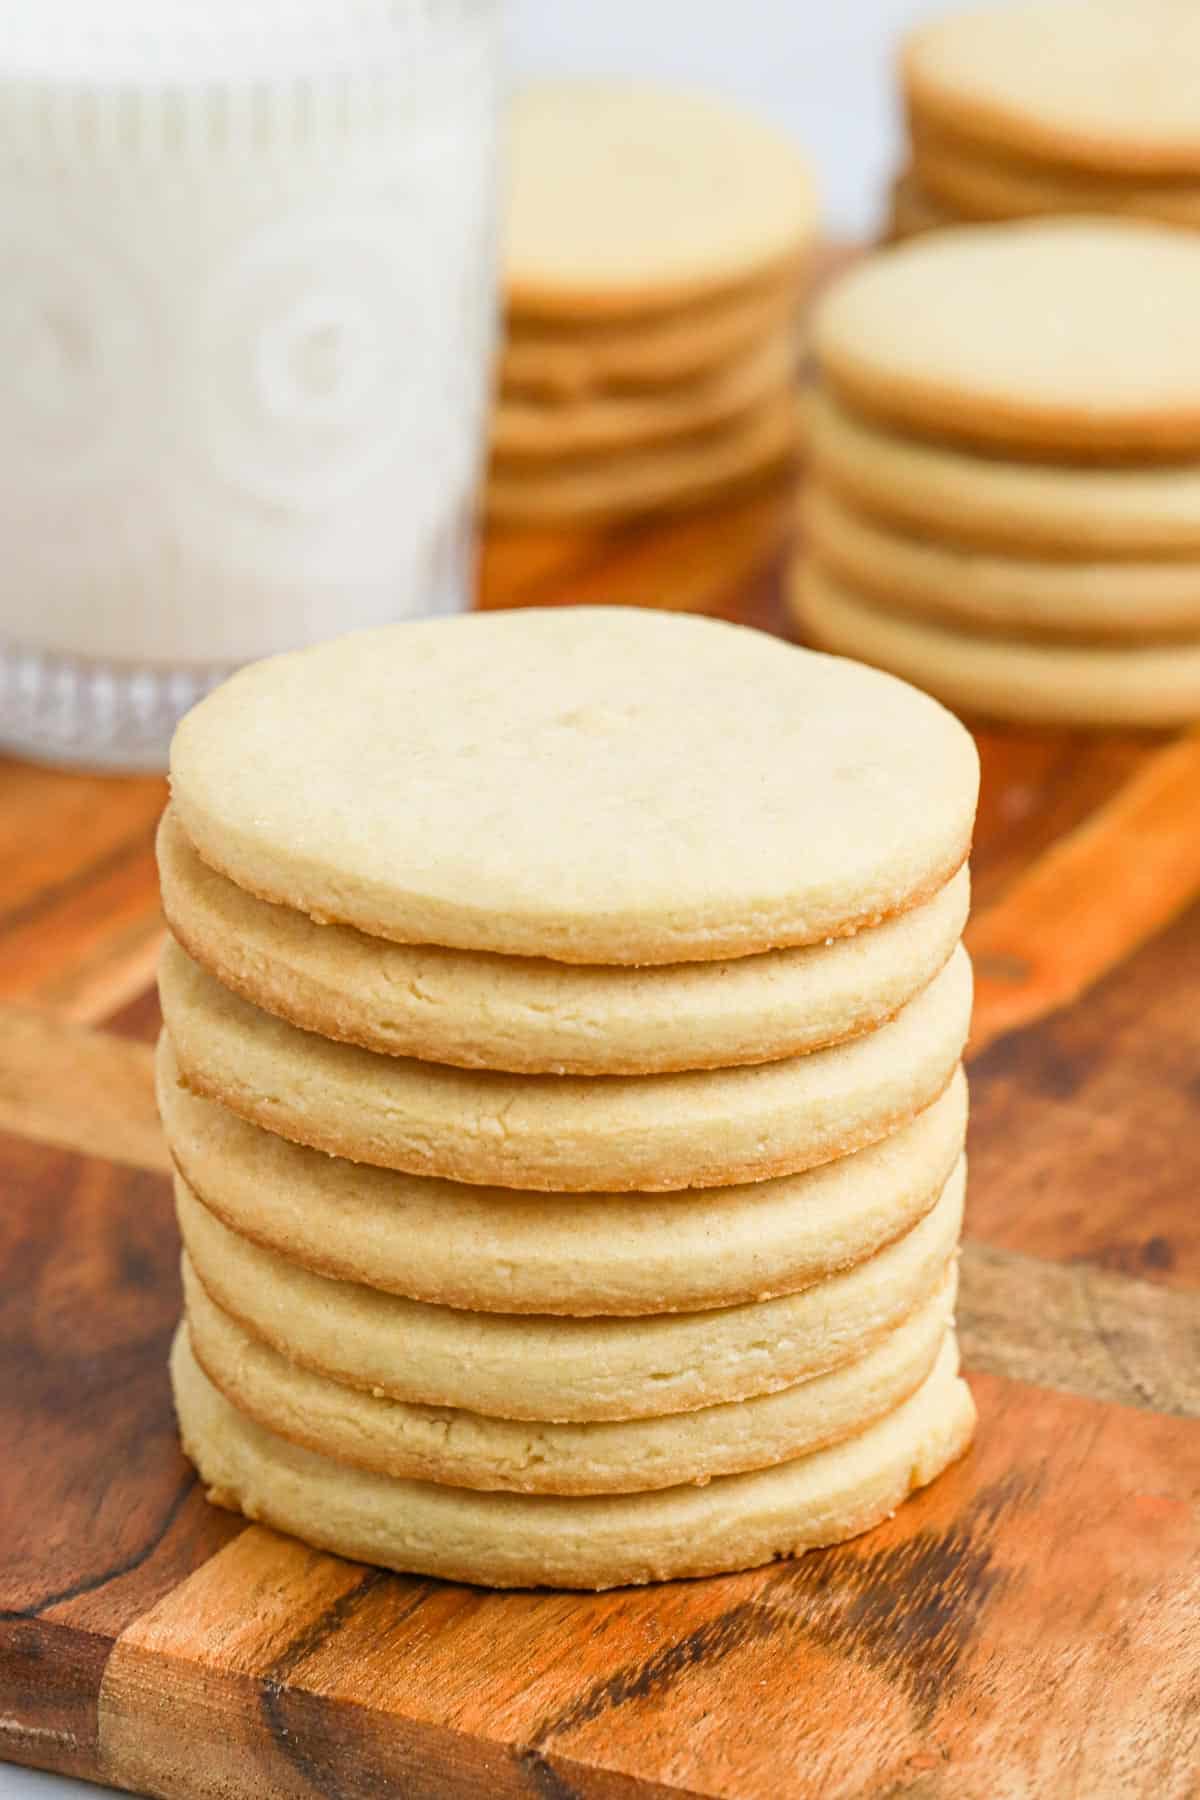 A stack of round sugar cookies without icing in front of milk.